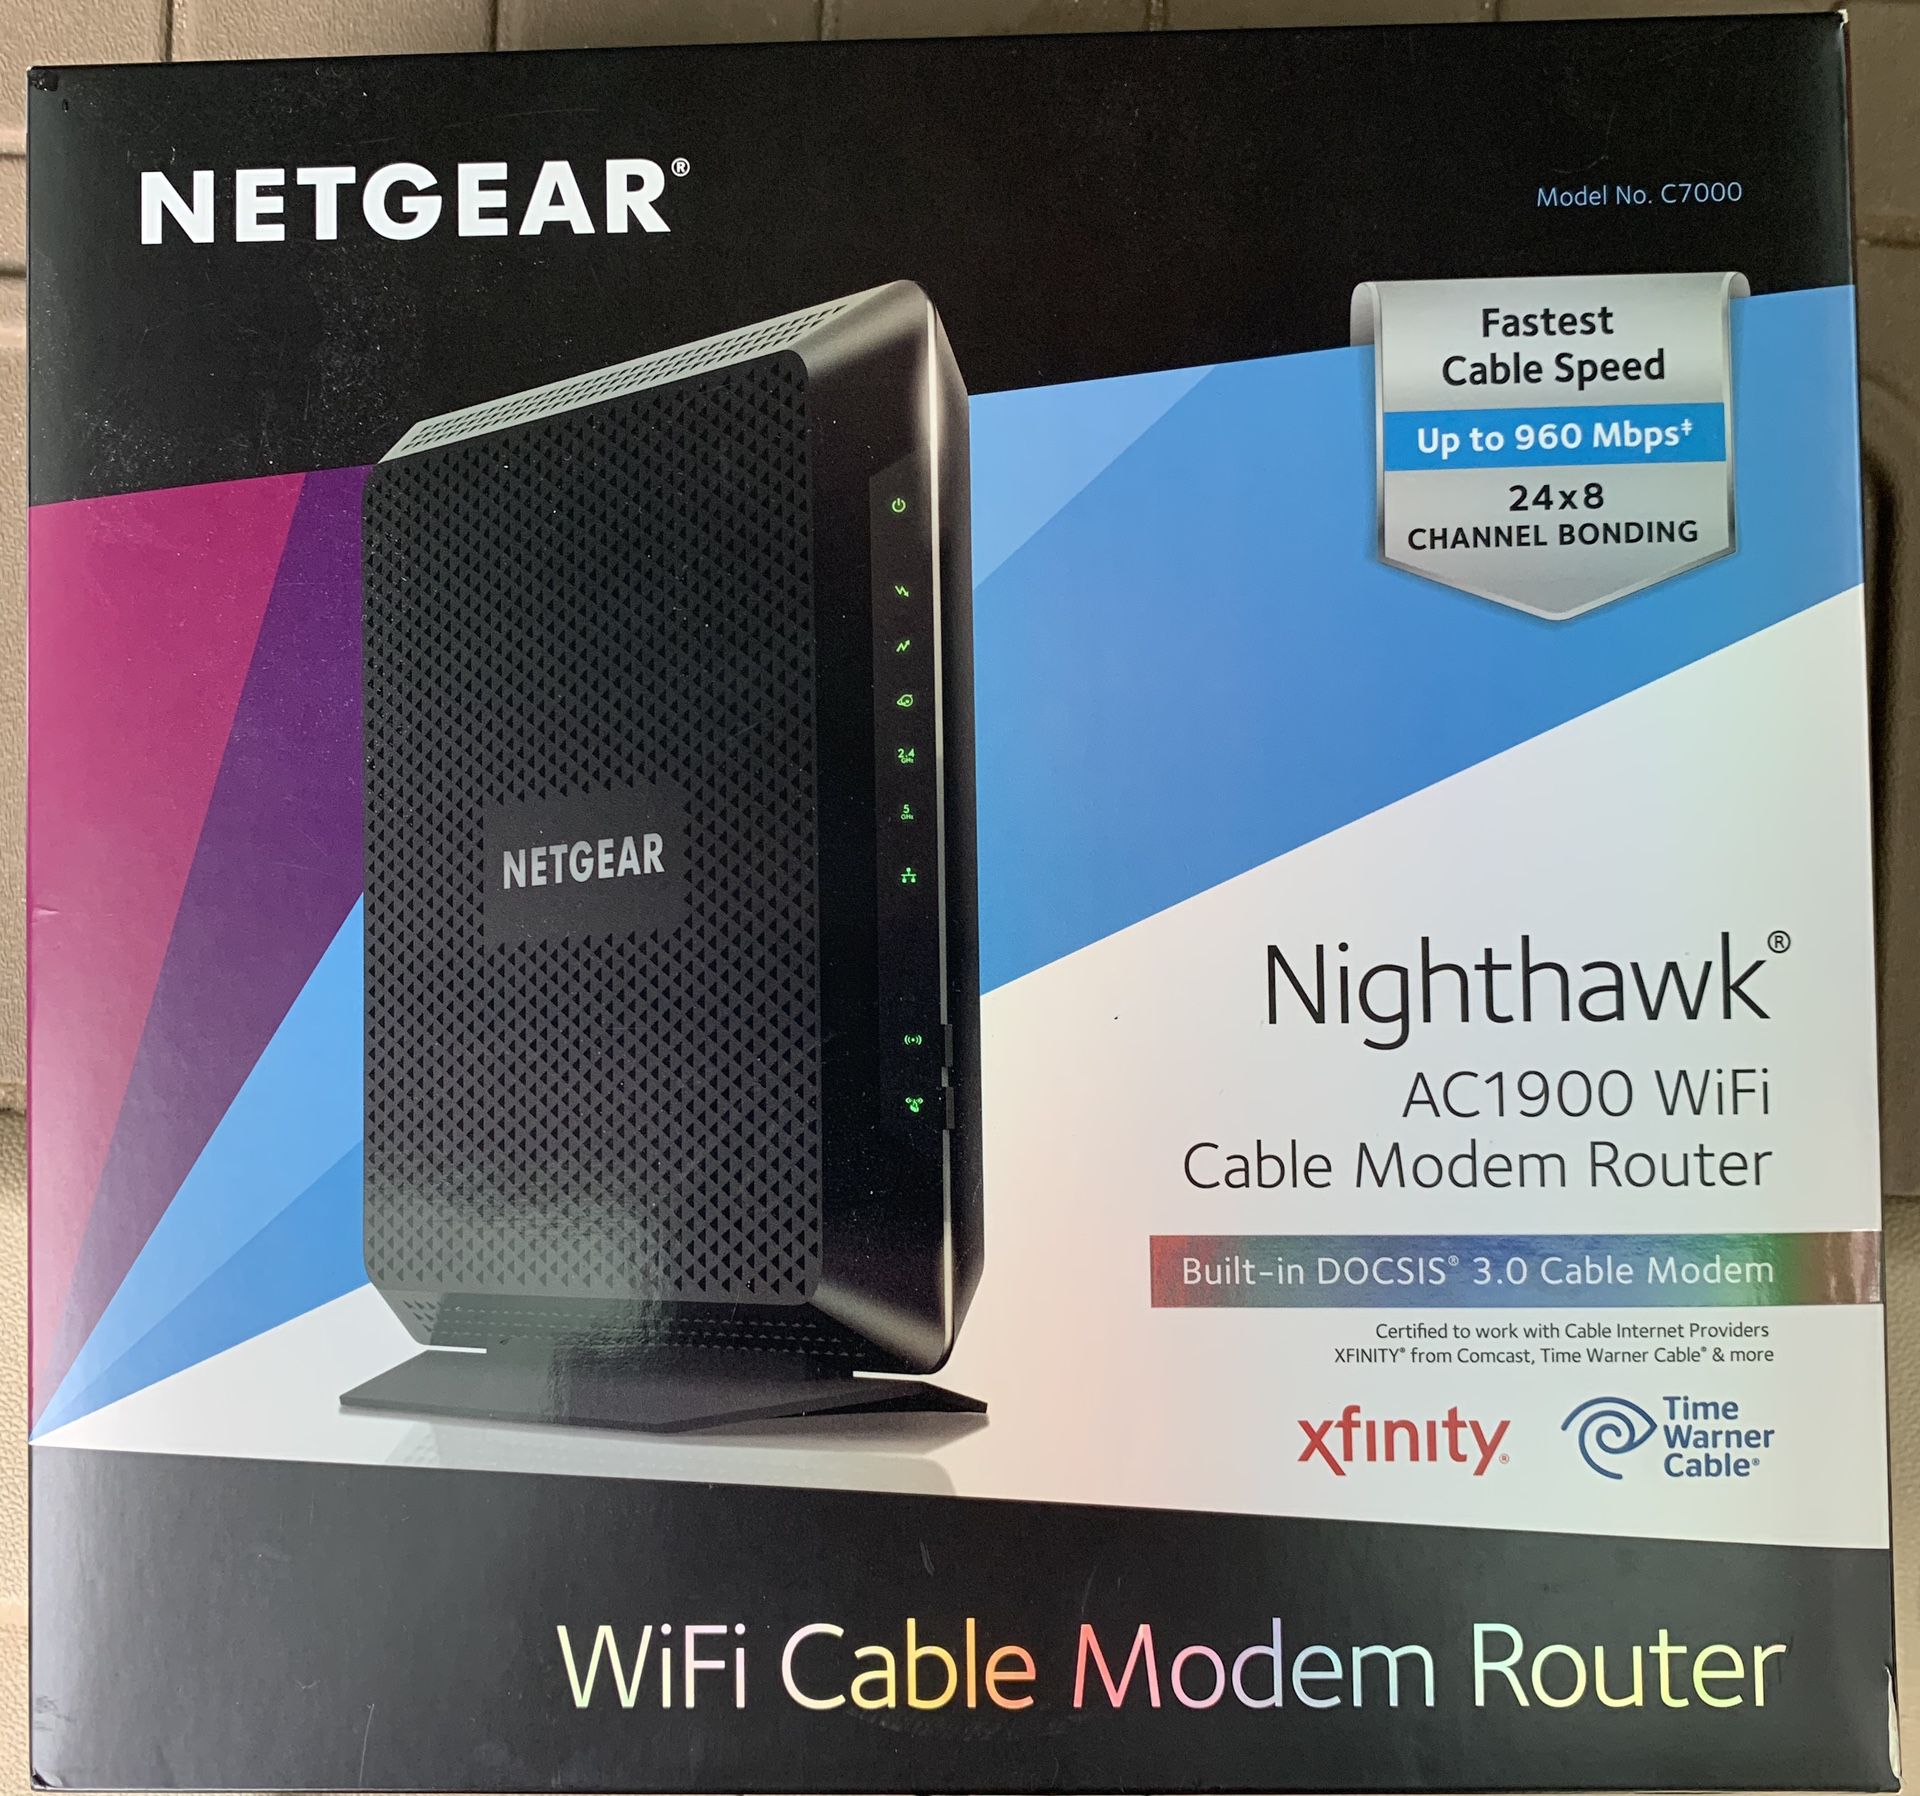 NETGEAR Nighthawk AC1900/C7000 (24x8) DOCSIS 3.0 WiFi Cable Modem Router Combo (AC1900) for Xfinity from Comcast, Spectrum, Cox, more